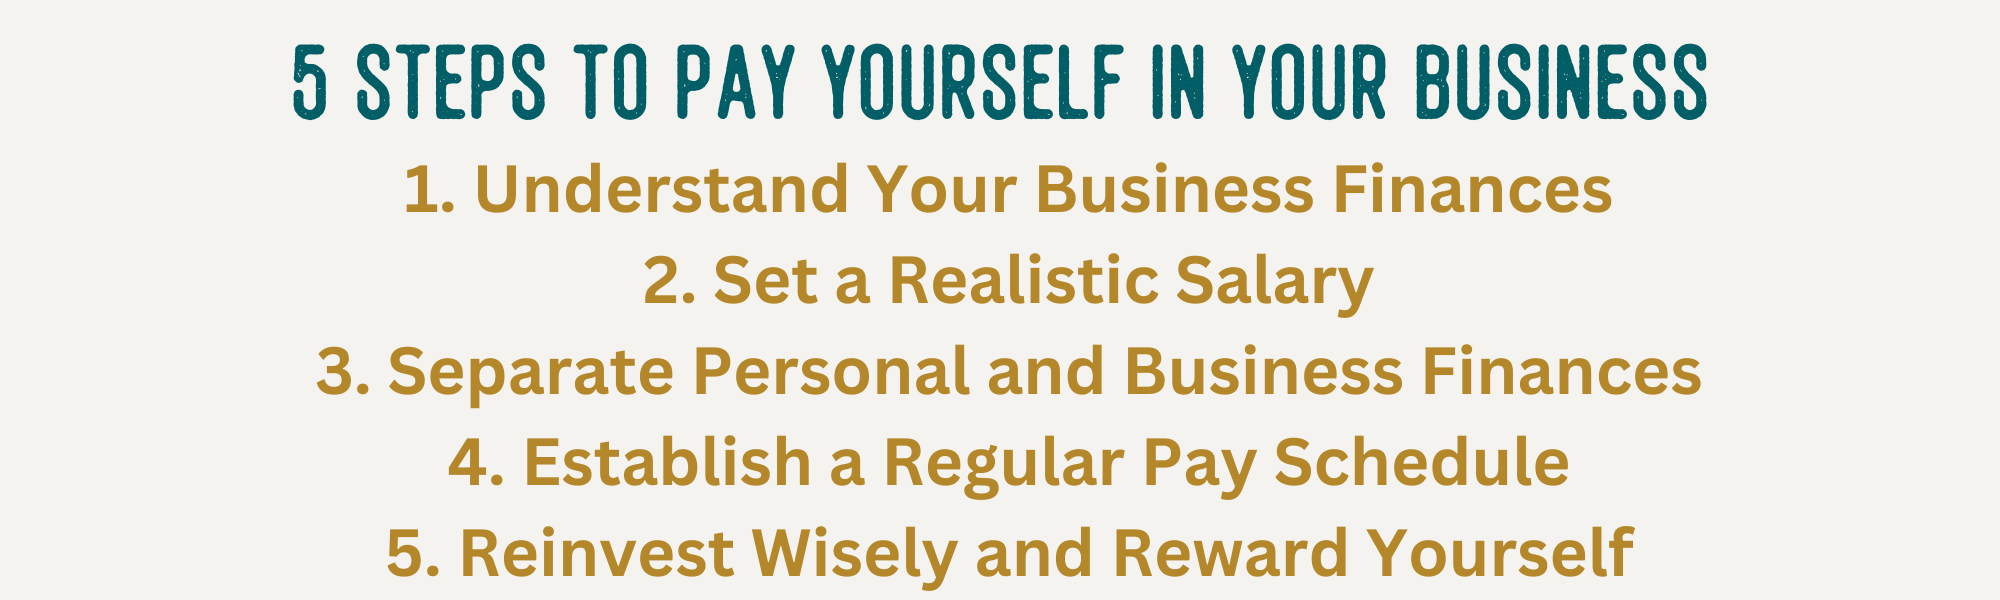 5 steps to paying yourself in your business